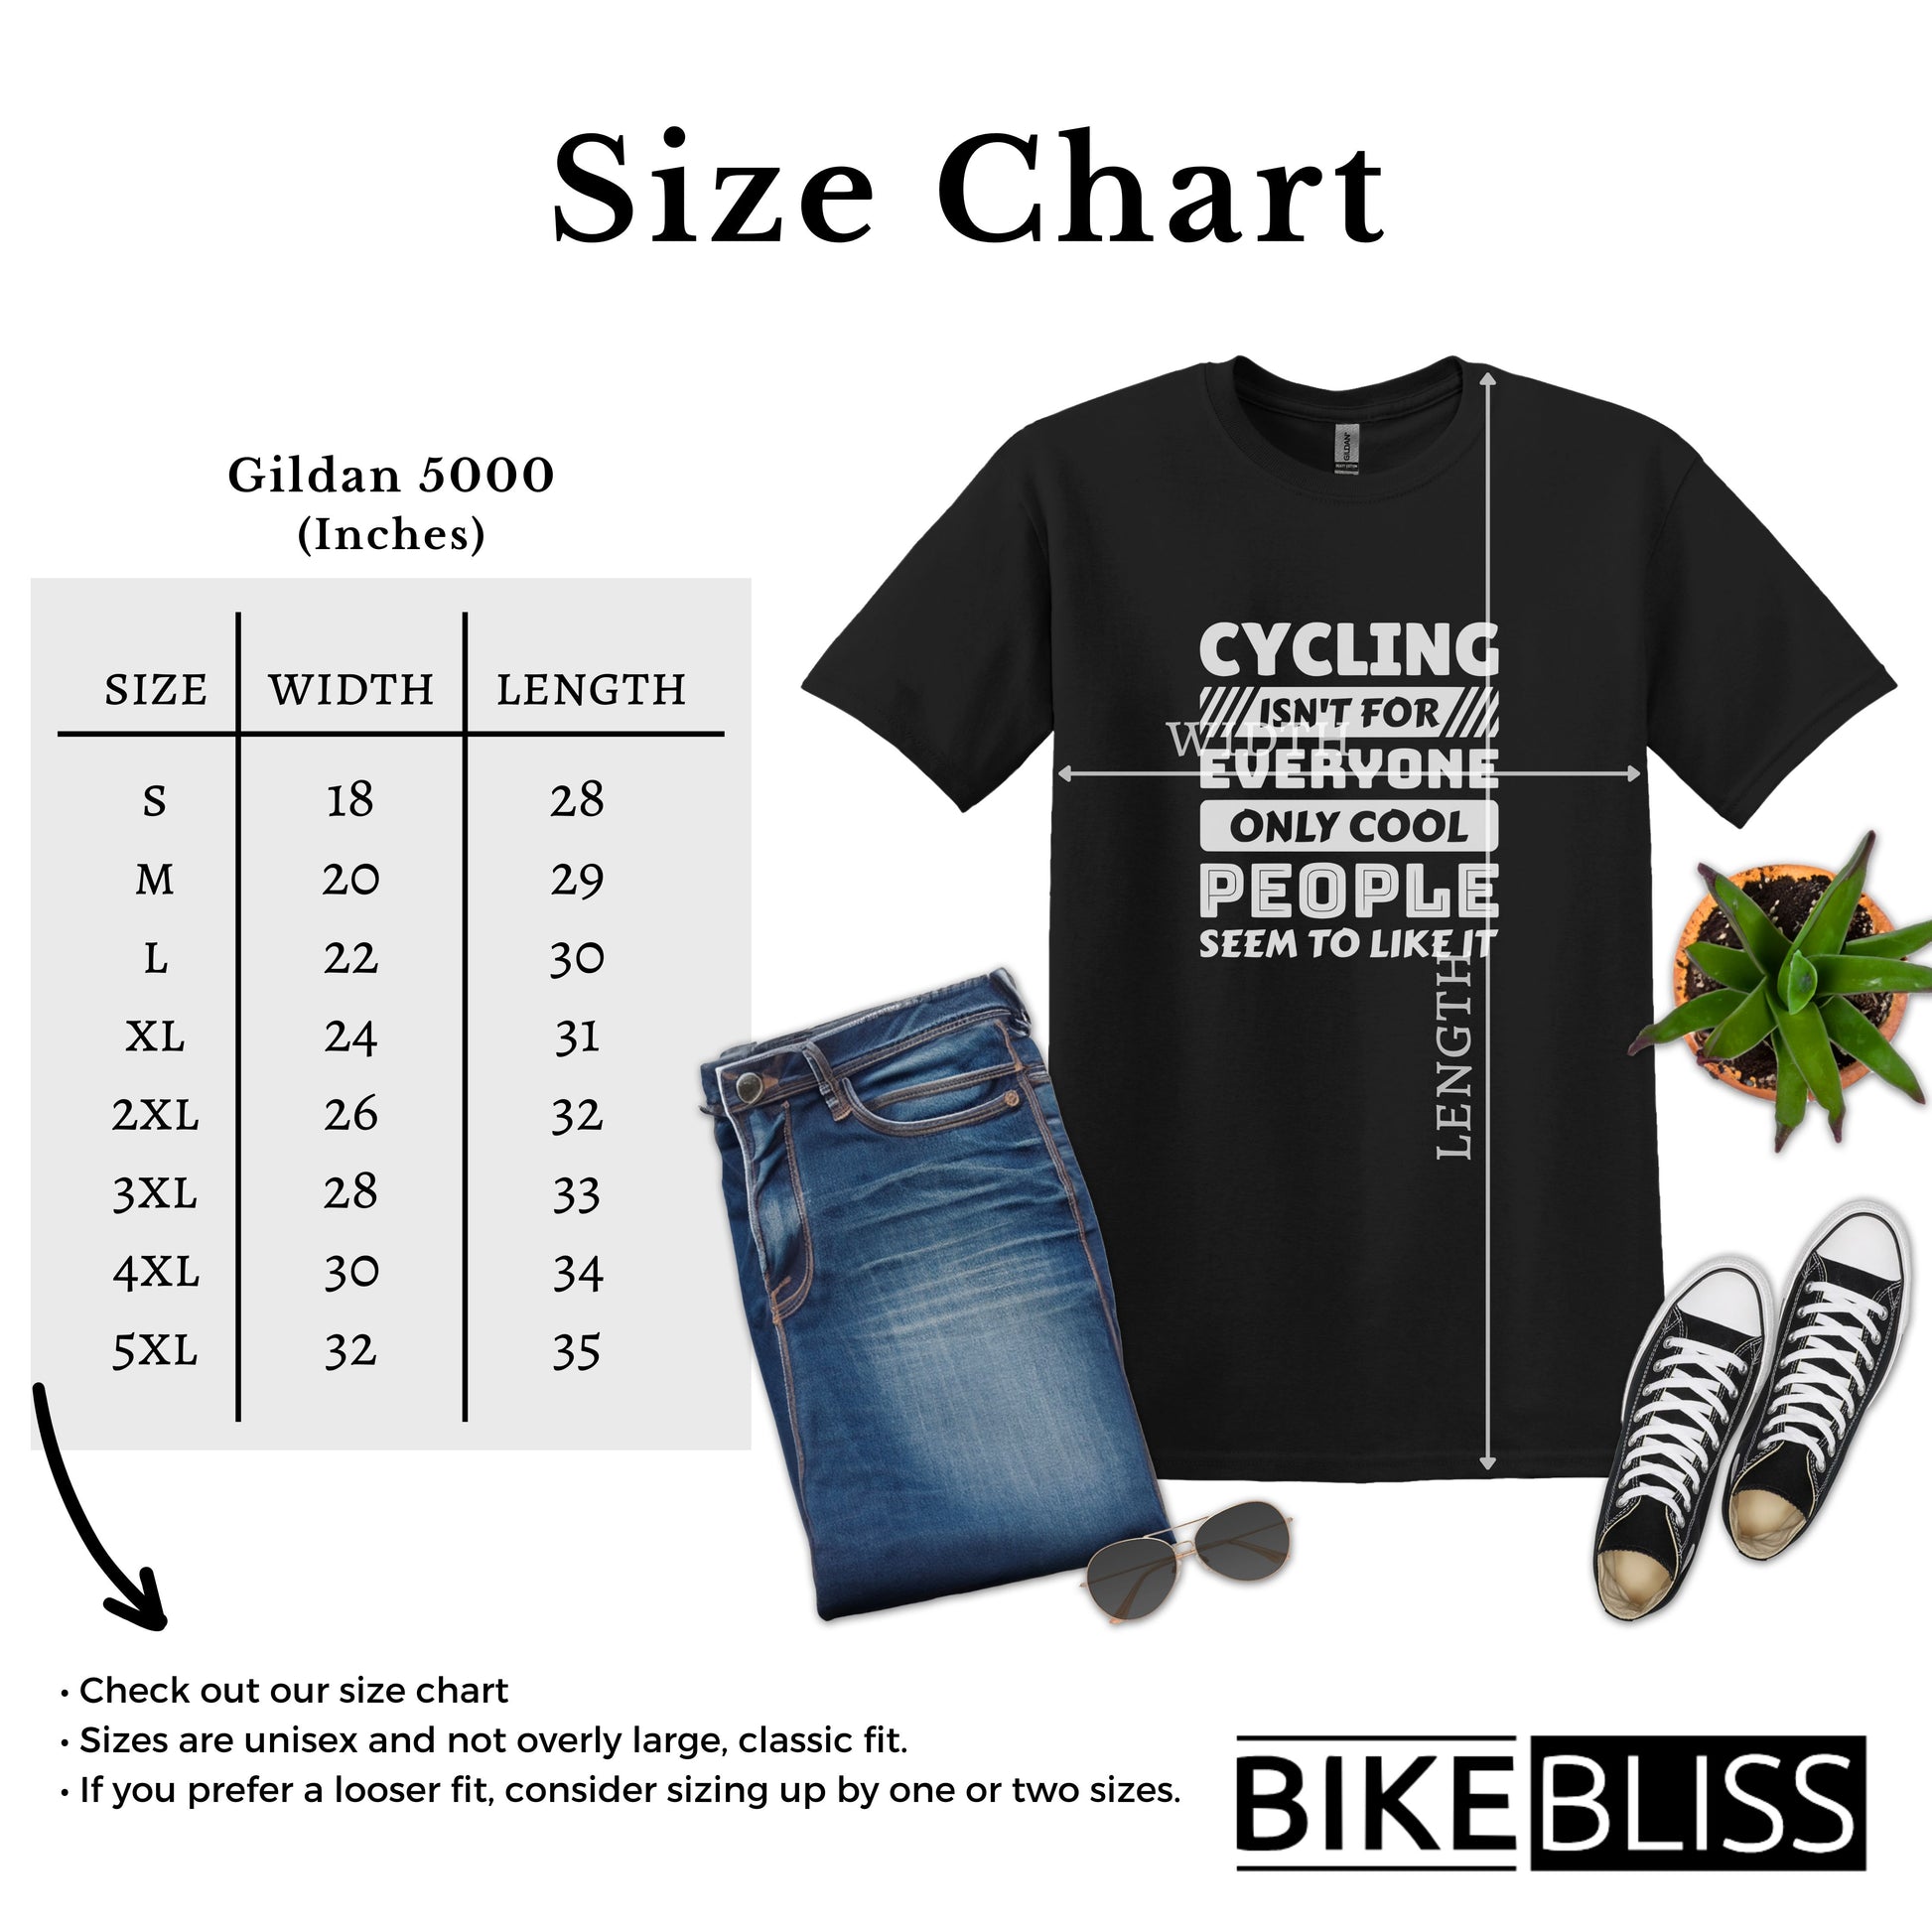 Bike Bliss Cycling isn't for everyone only Cool People seem to like it T-Shirt for Men Size Chart